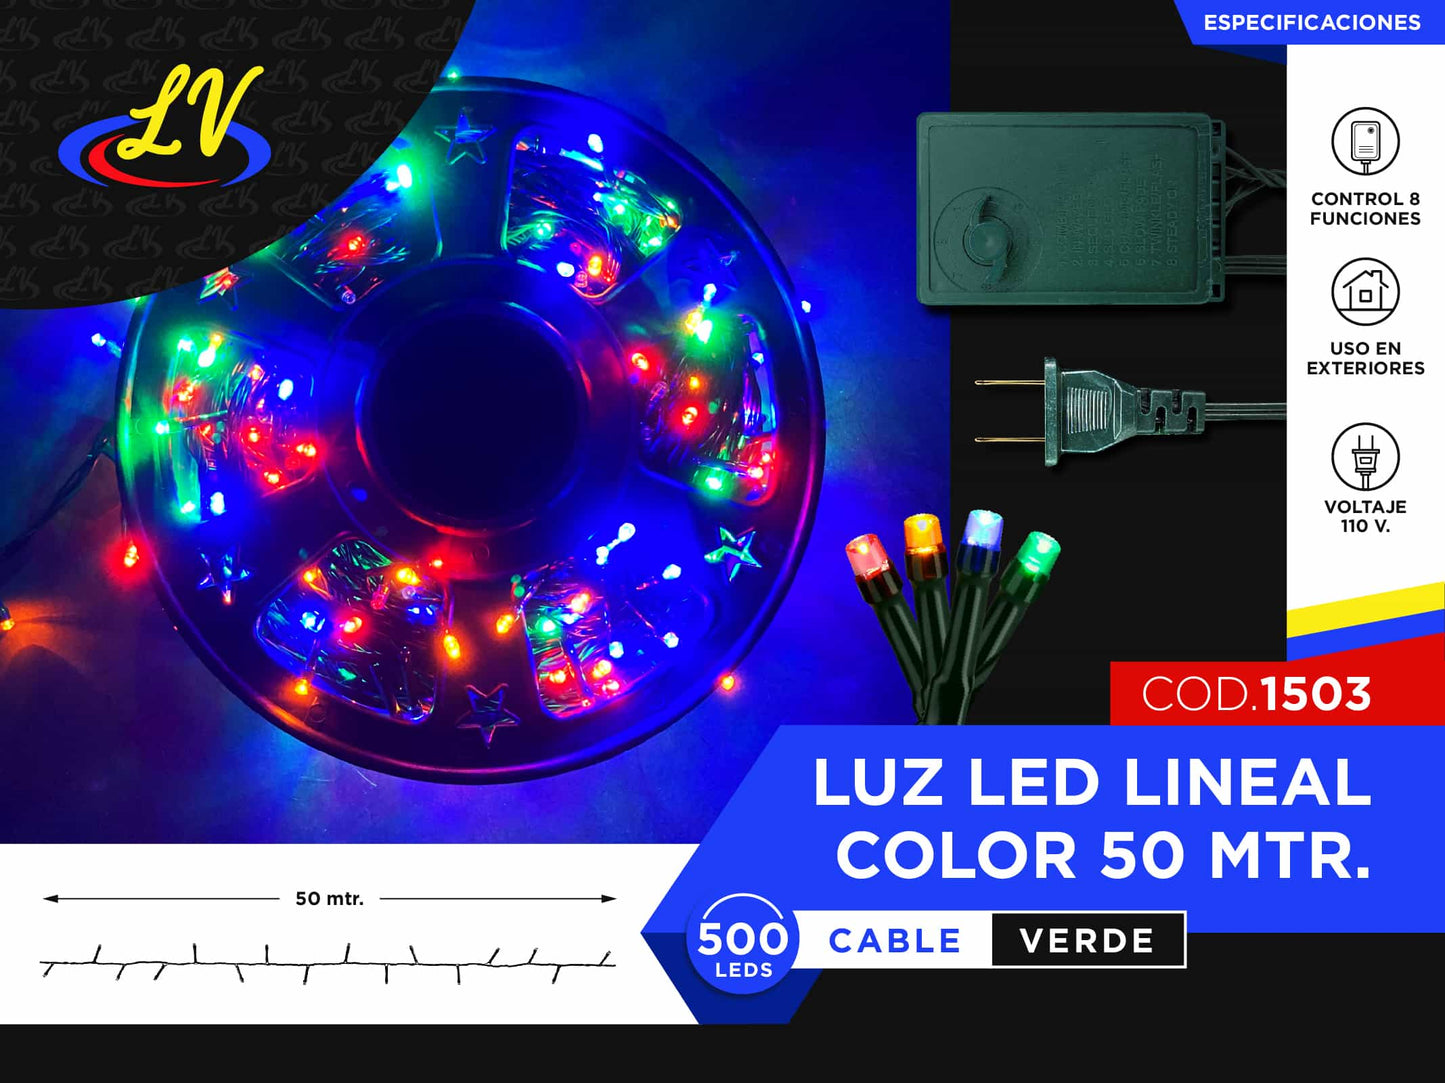 LINEAL TIPO UL – MULTICOLOR – 50 MTS